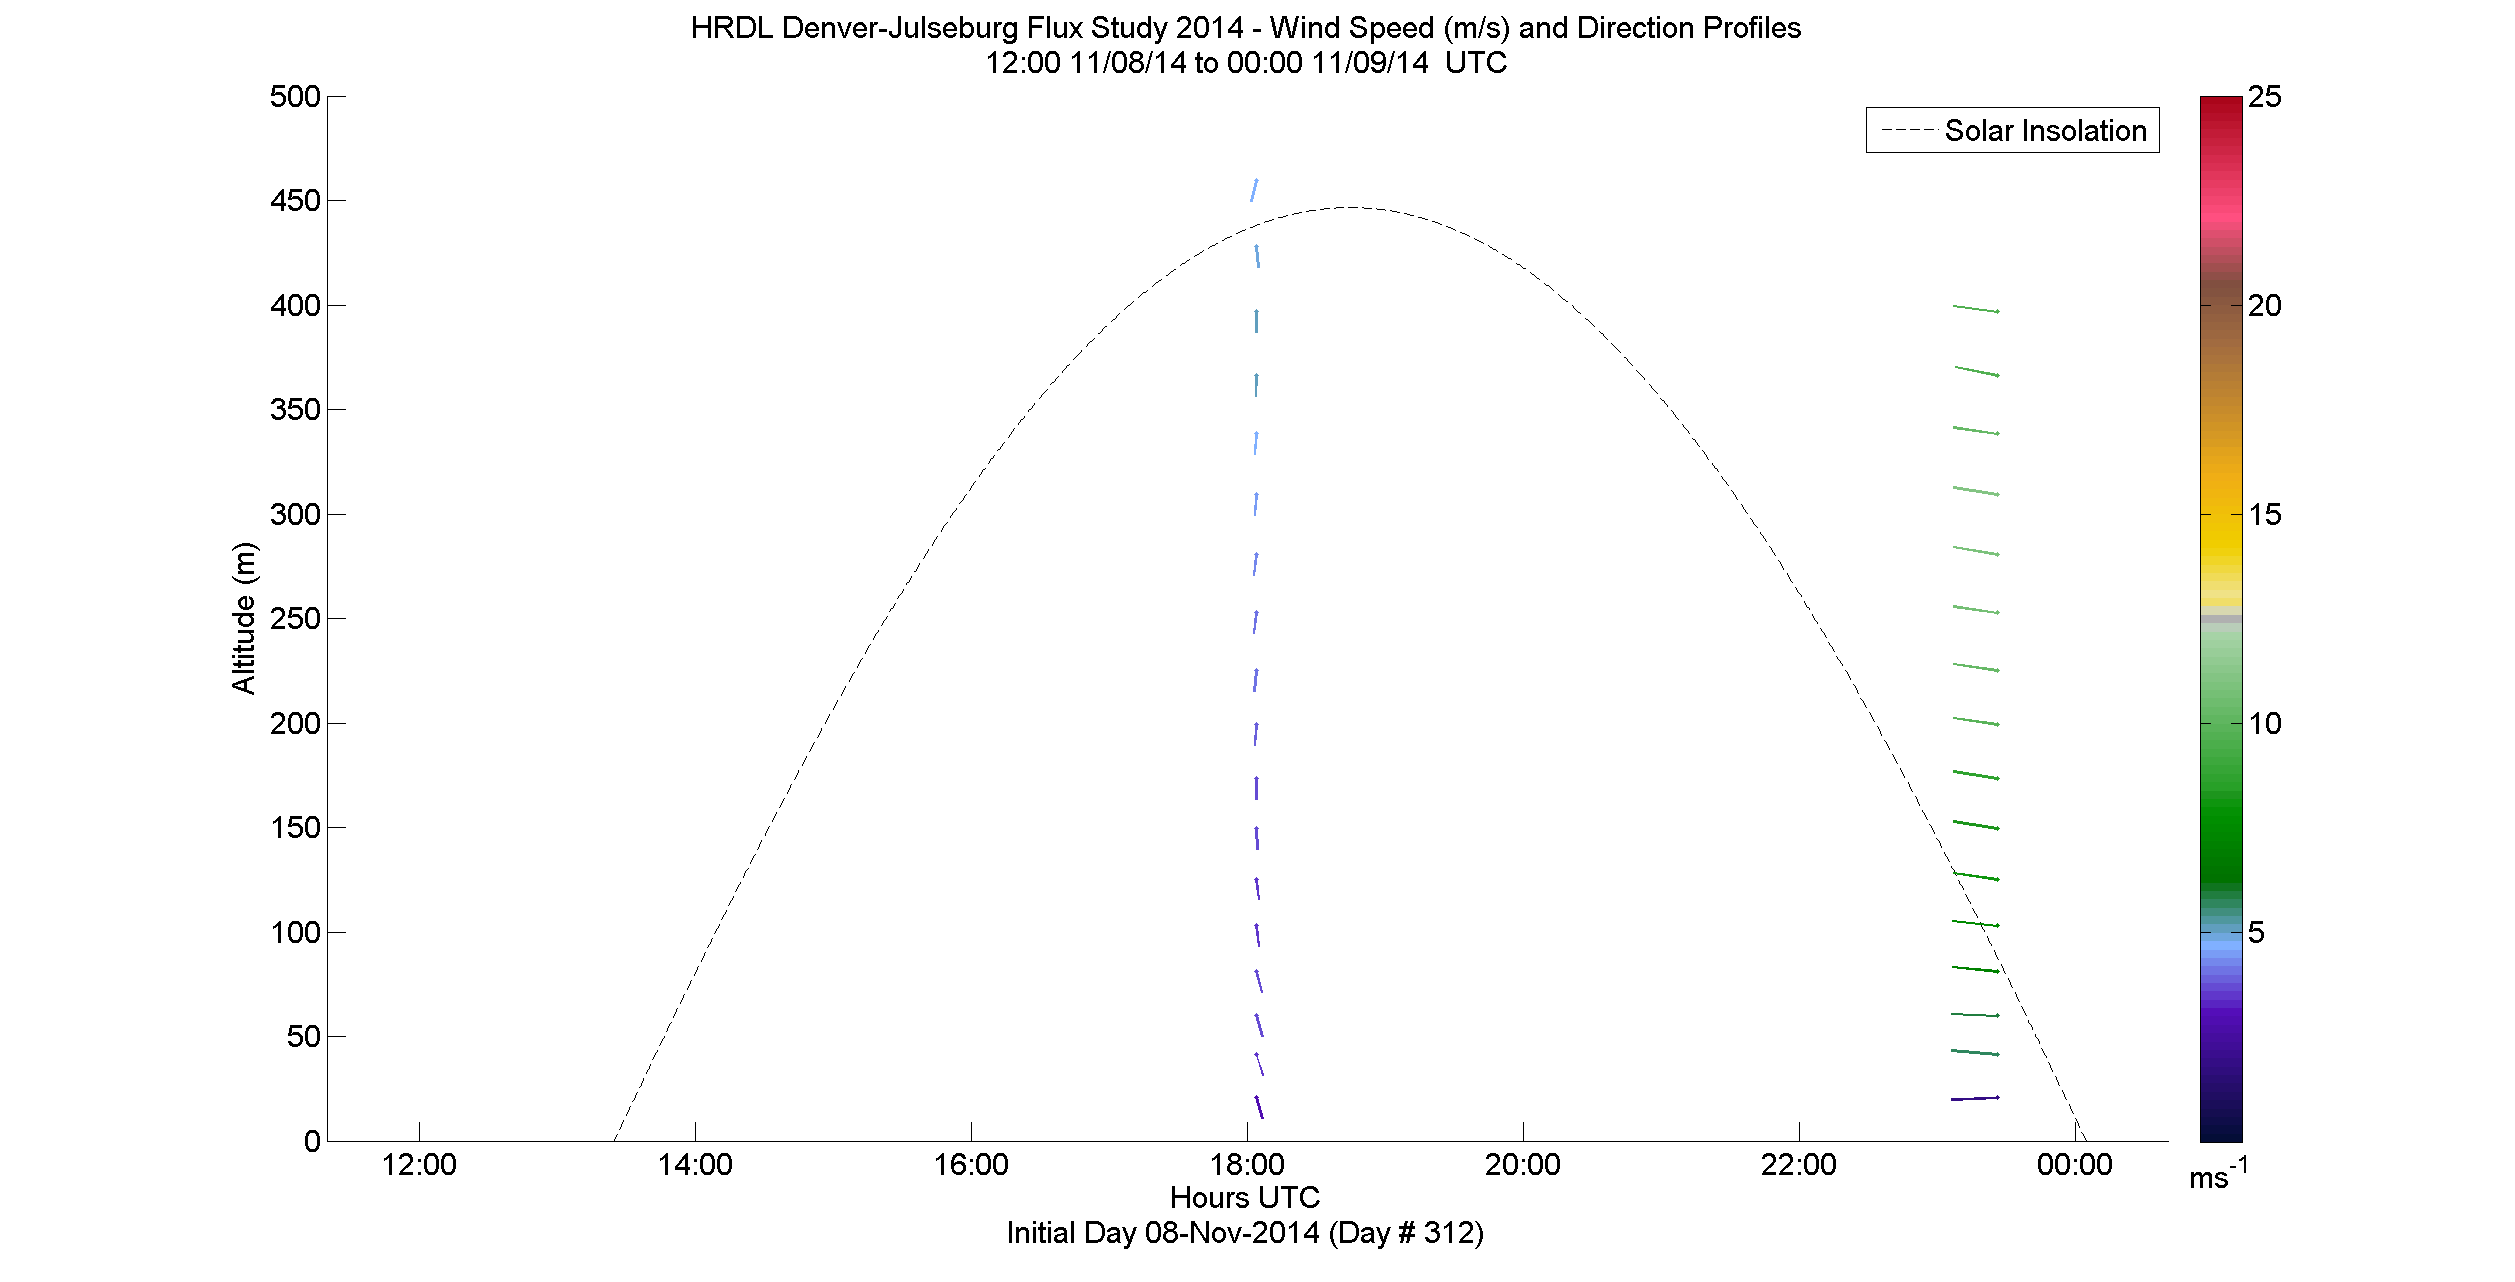 HRDL speed and direction profile - November 8 pm